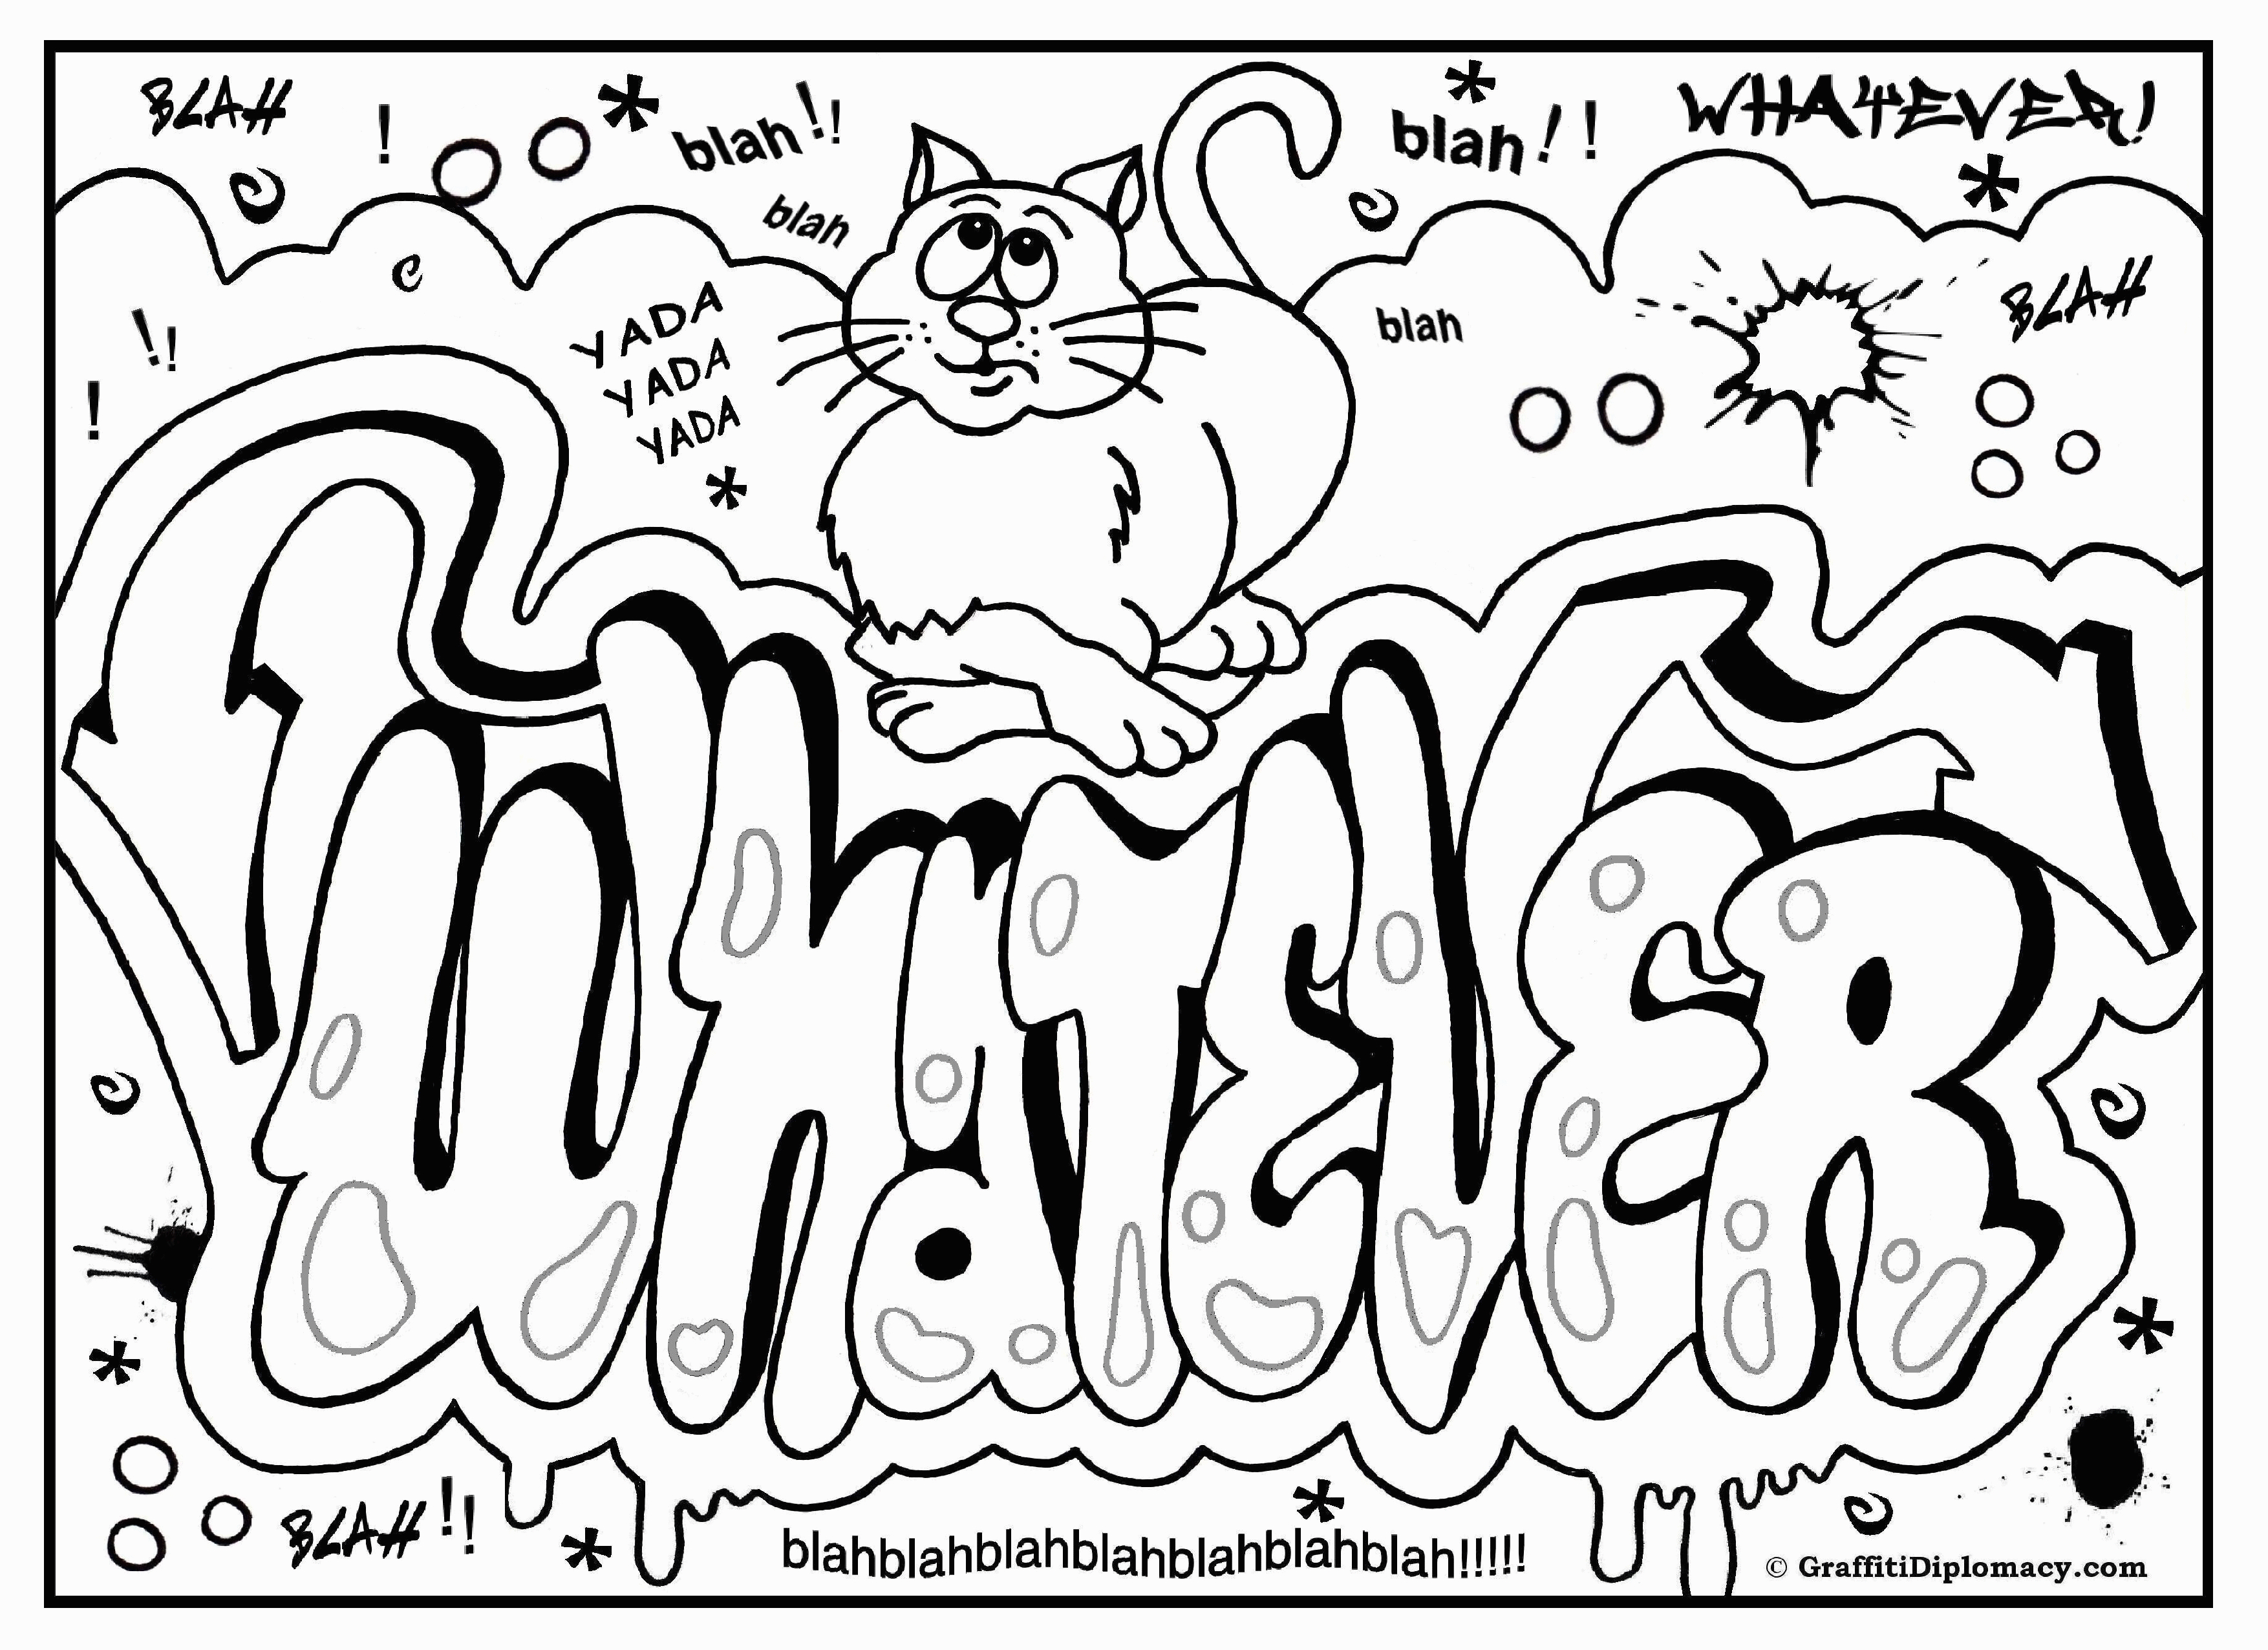 Word Coloring Page Generator Multicultural Graffiti Art Free Printable Coloring Pages Free Photo